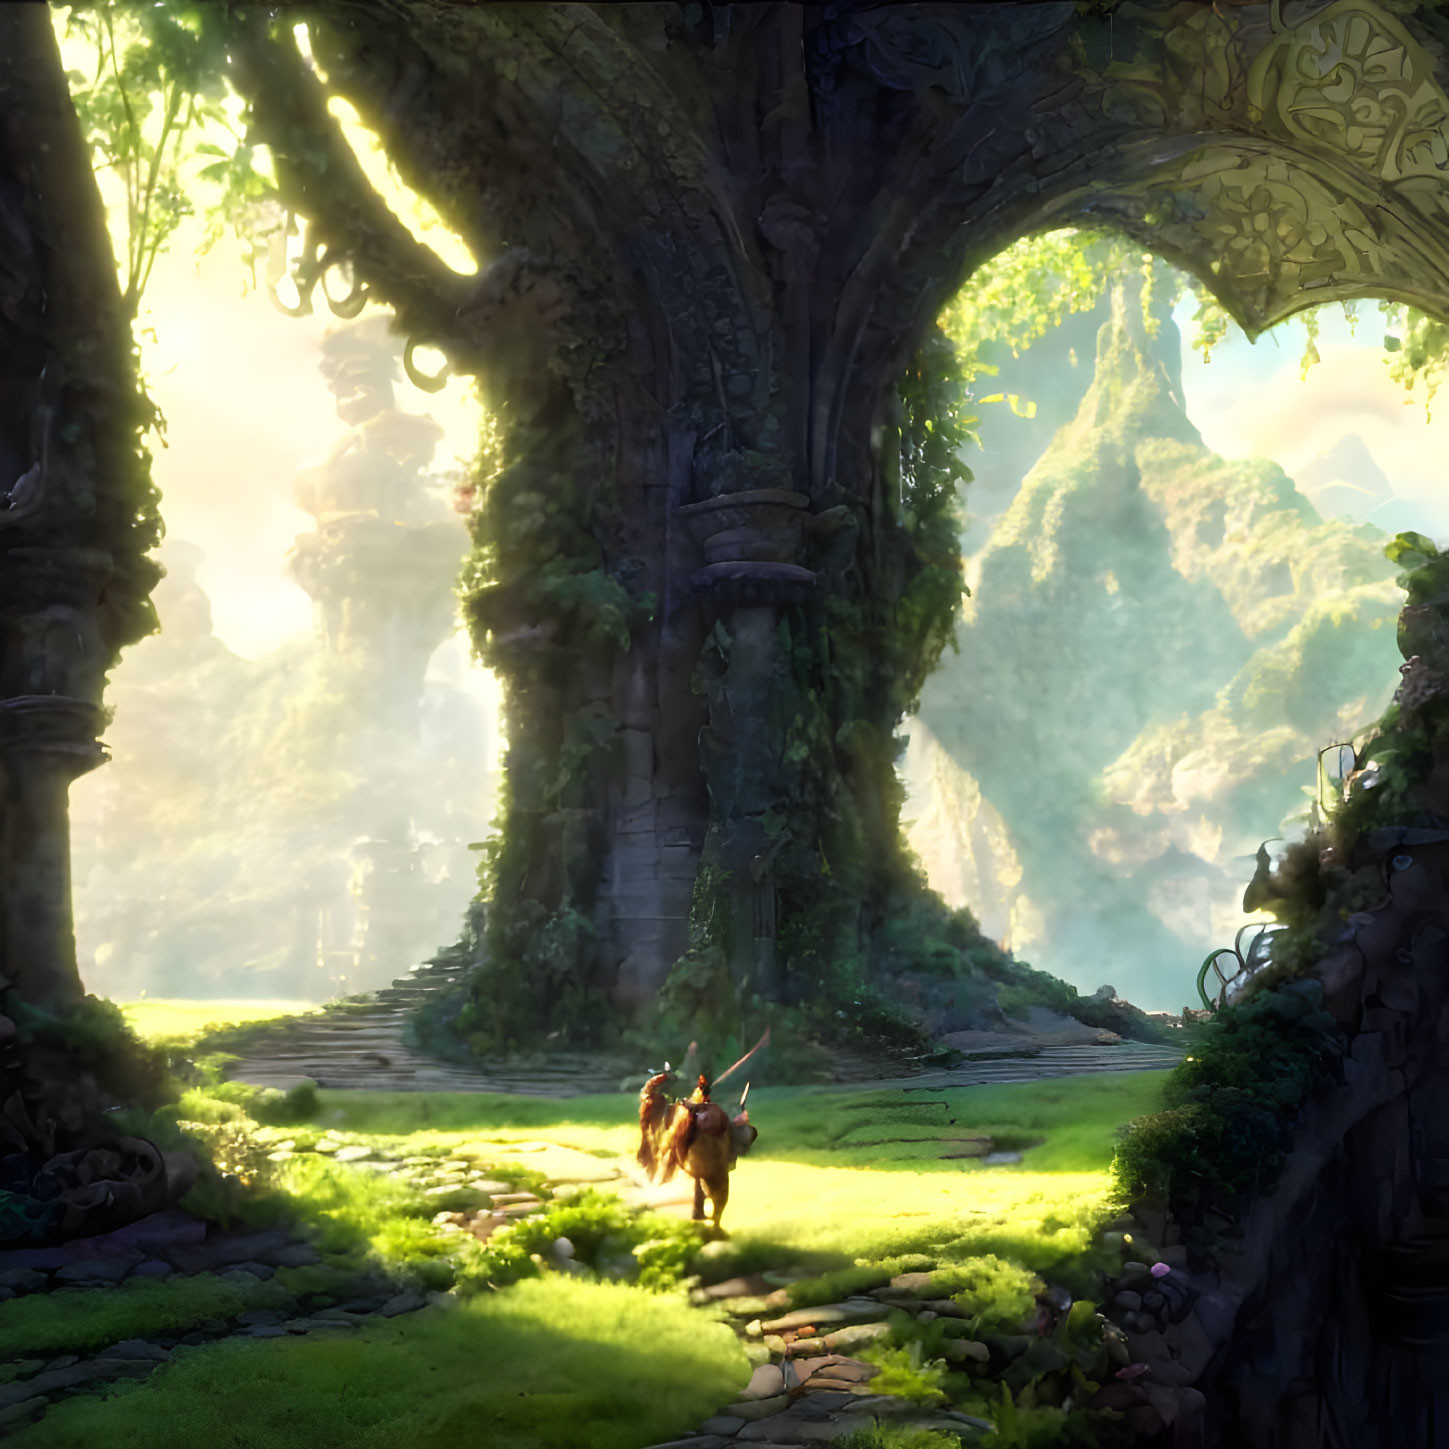 Enchanting forest scene with character, steed, and mountains in sunlight